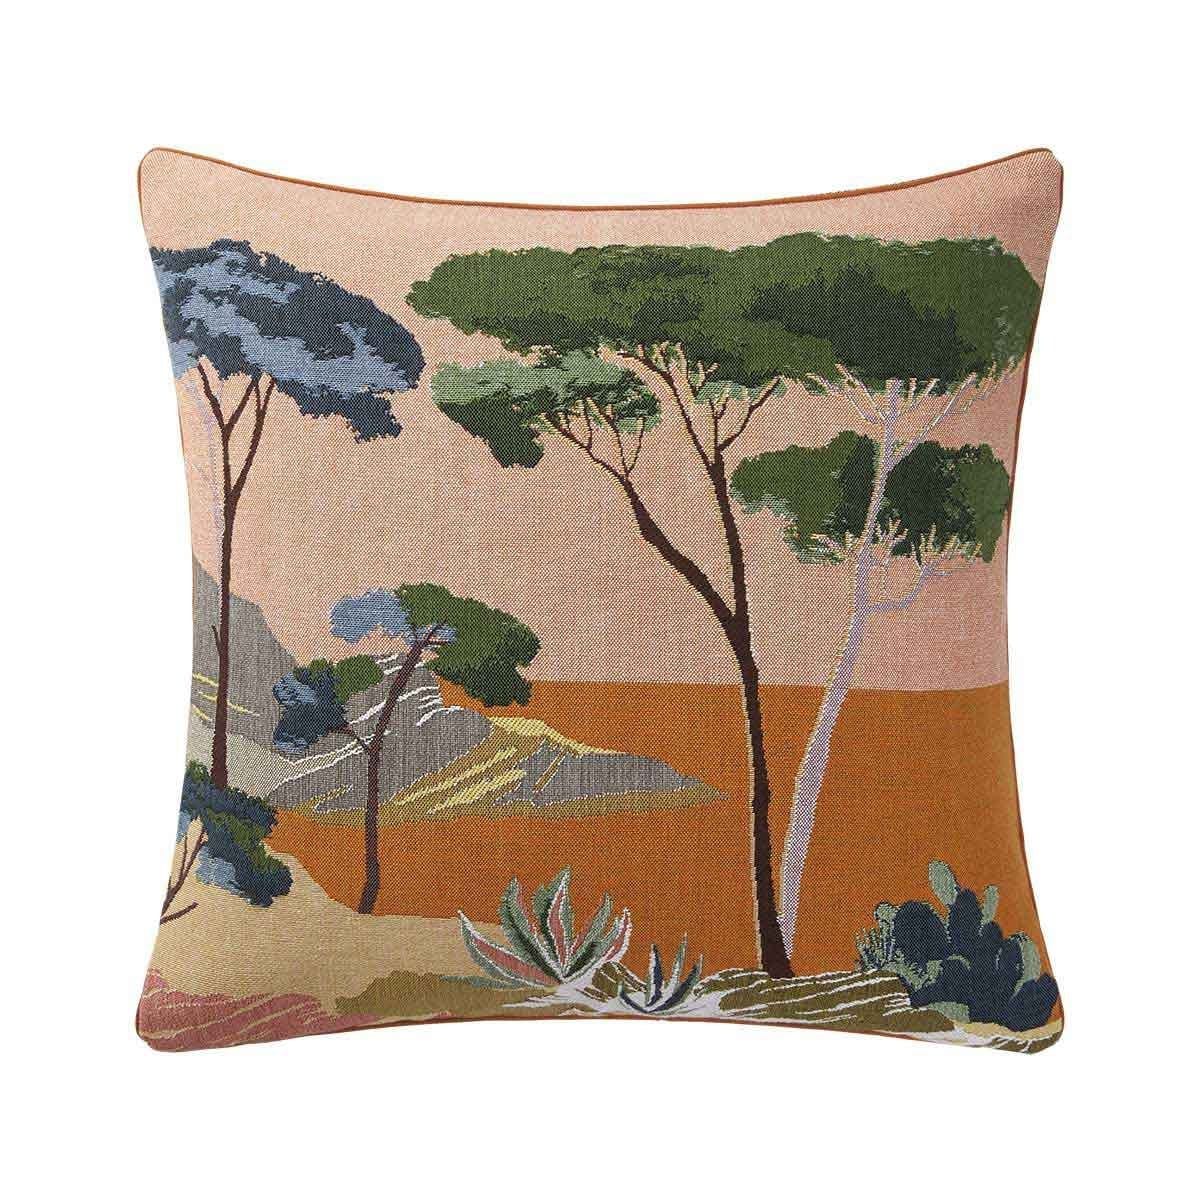 Yves Delorme Ombelle Decorative Pillows